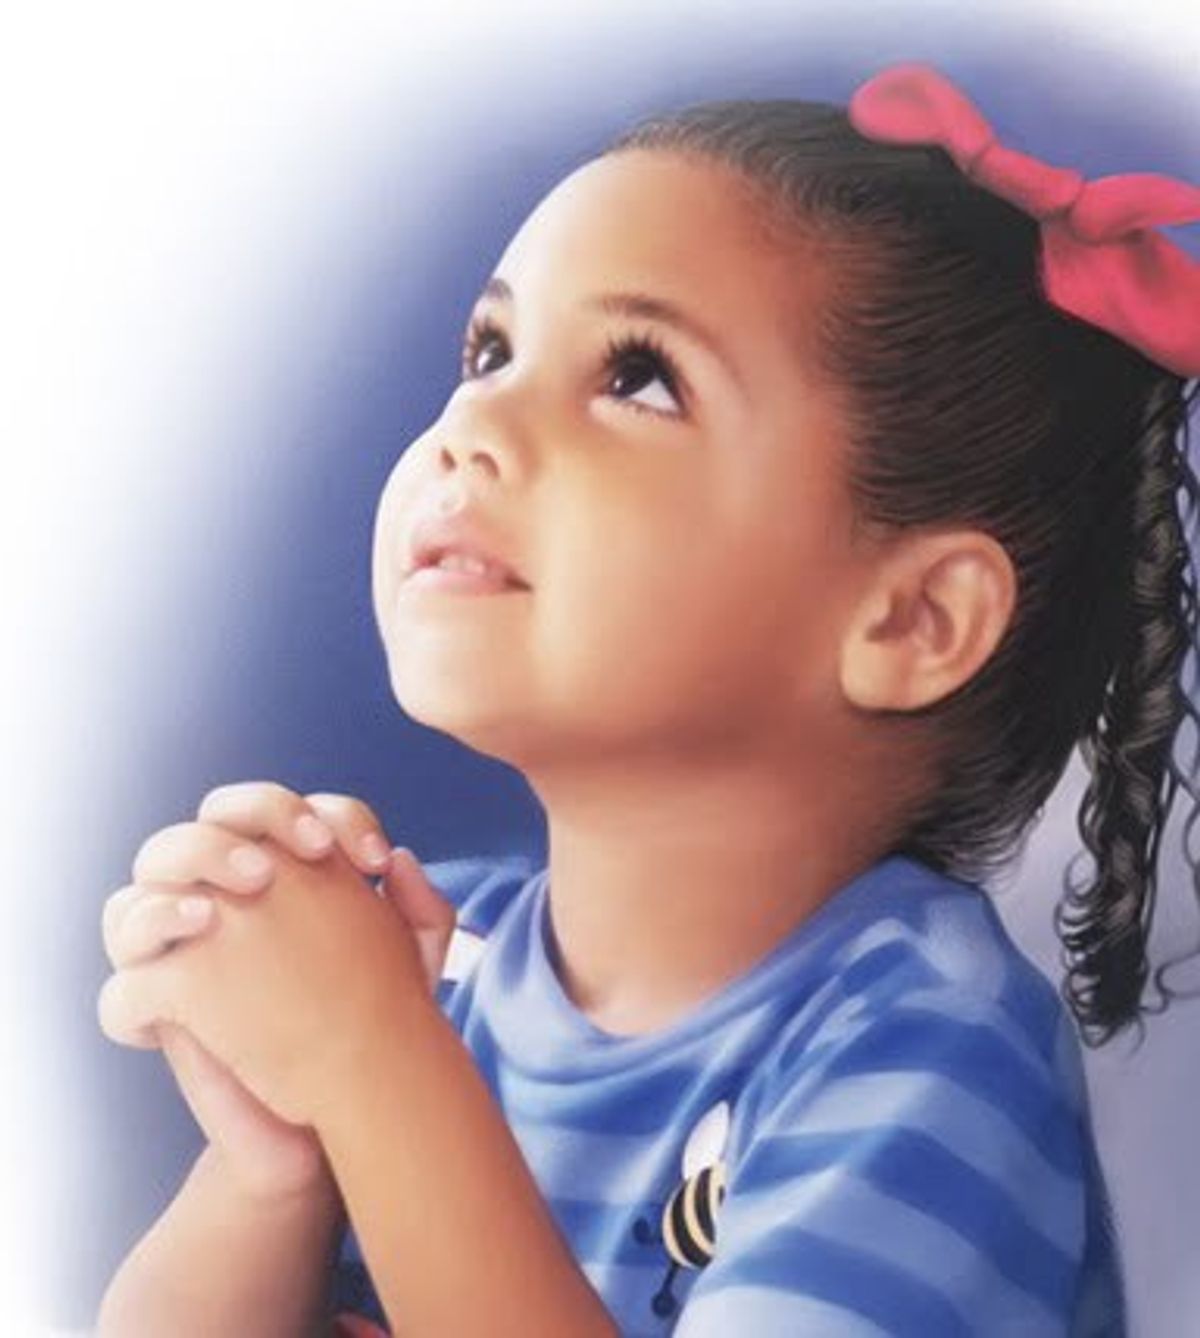 How A 7-Year-Old Taught Me About Prayer